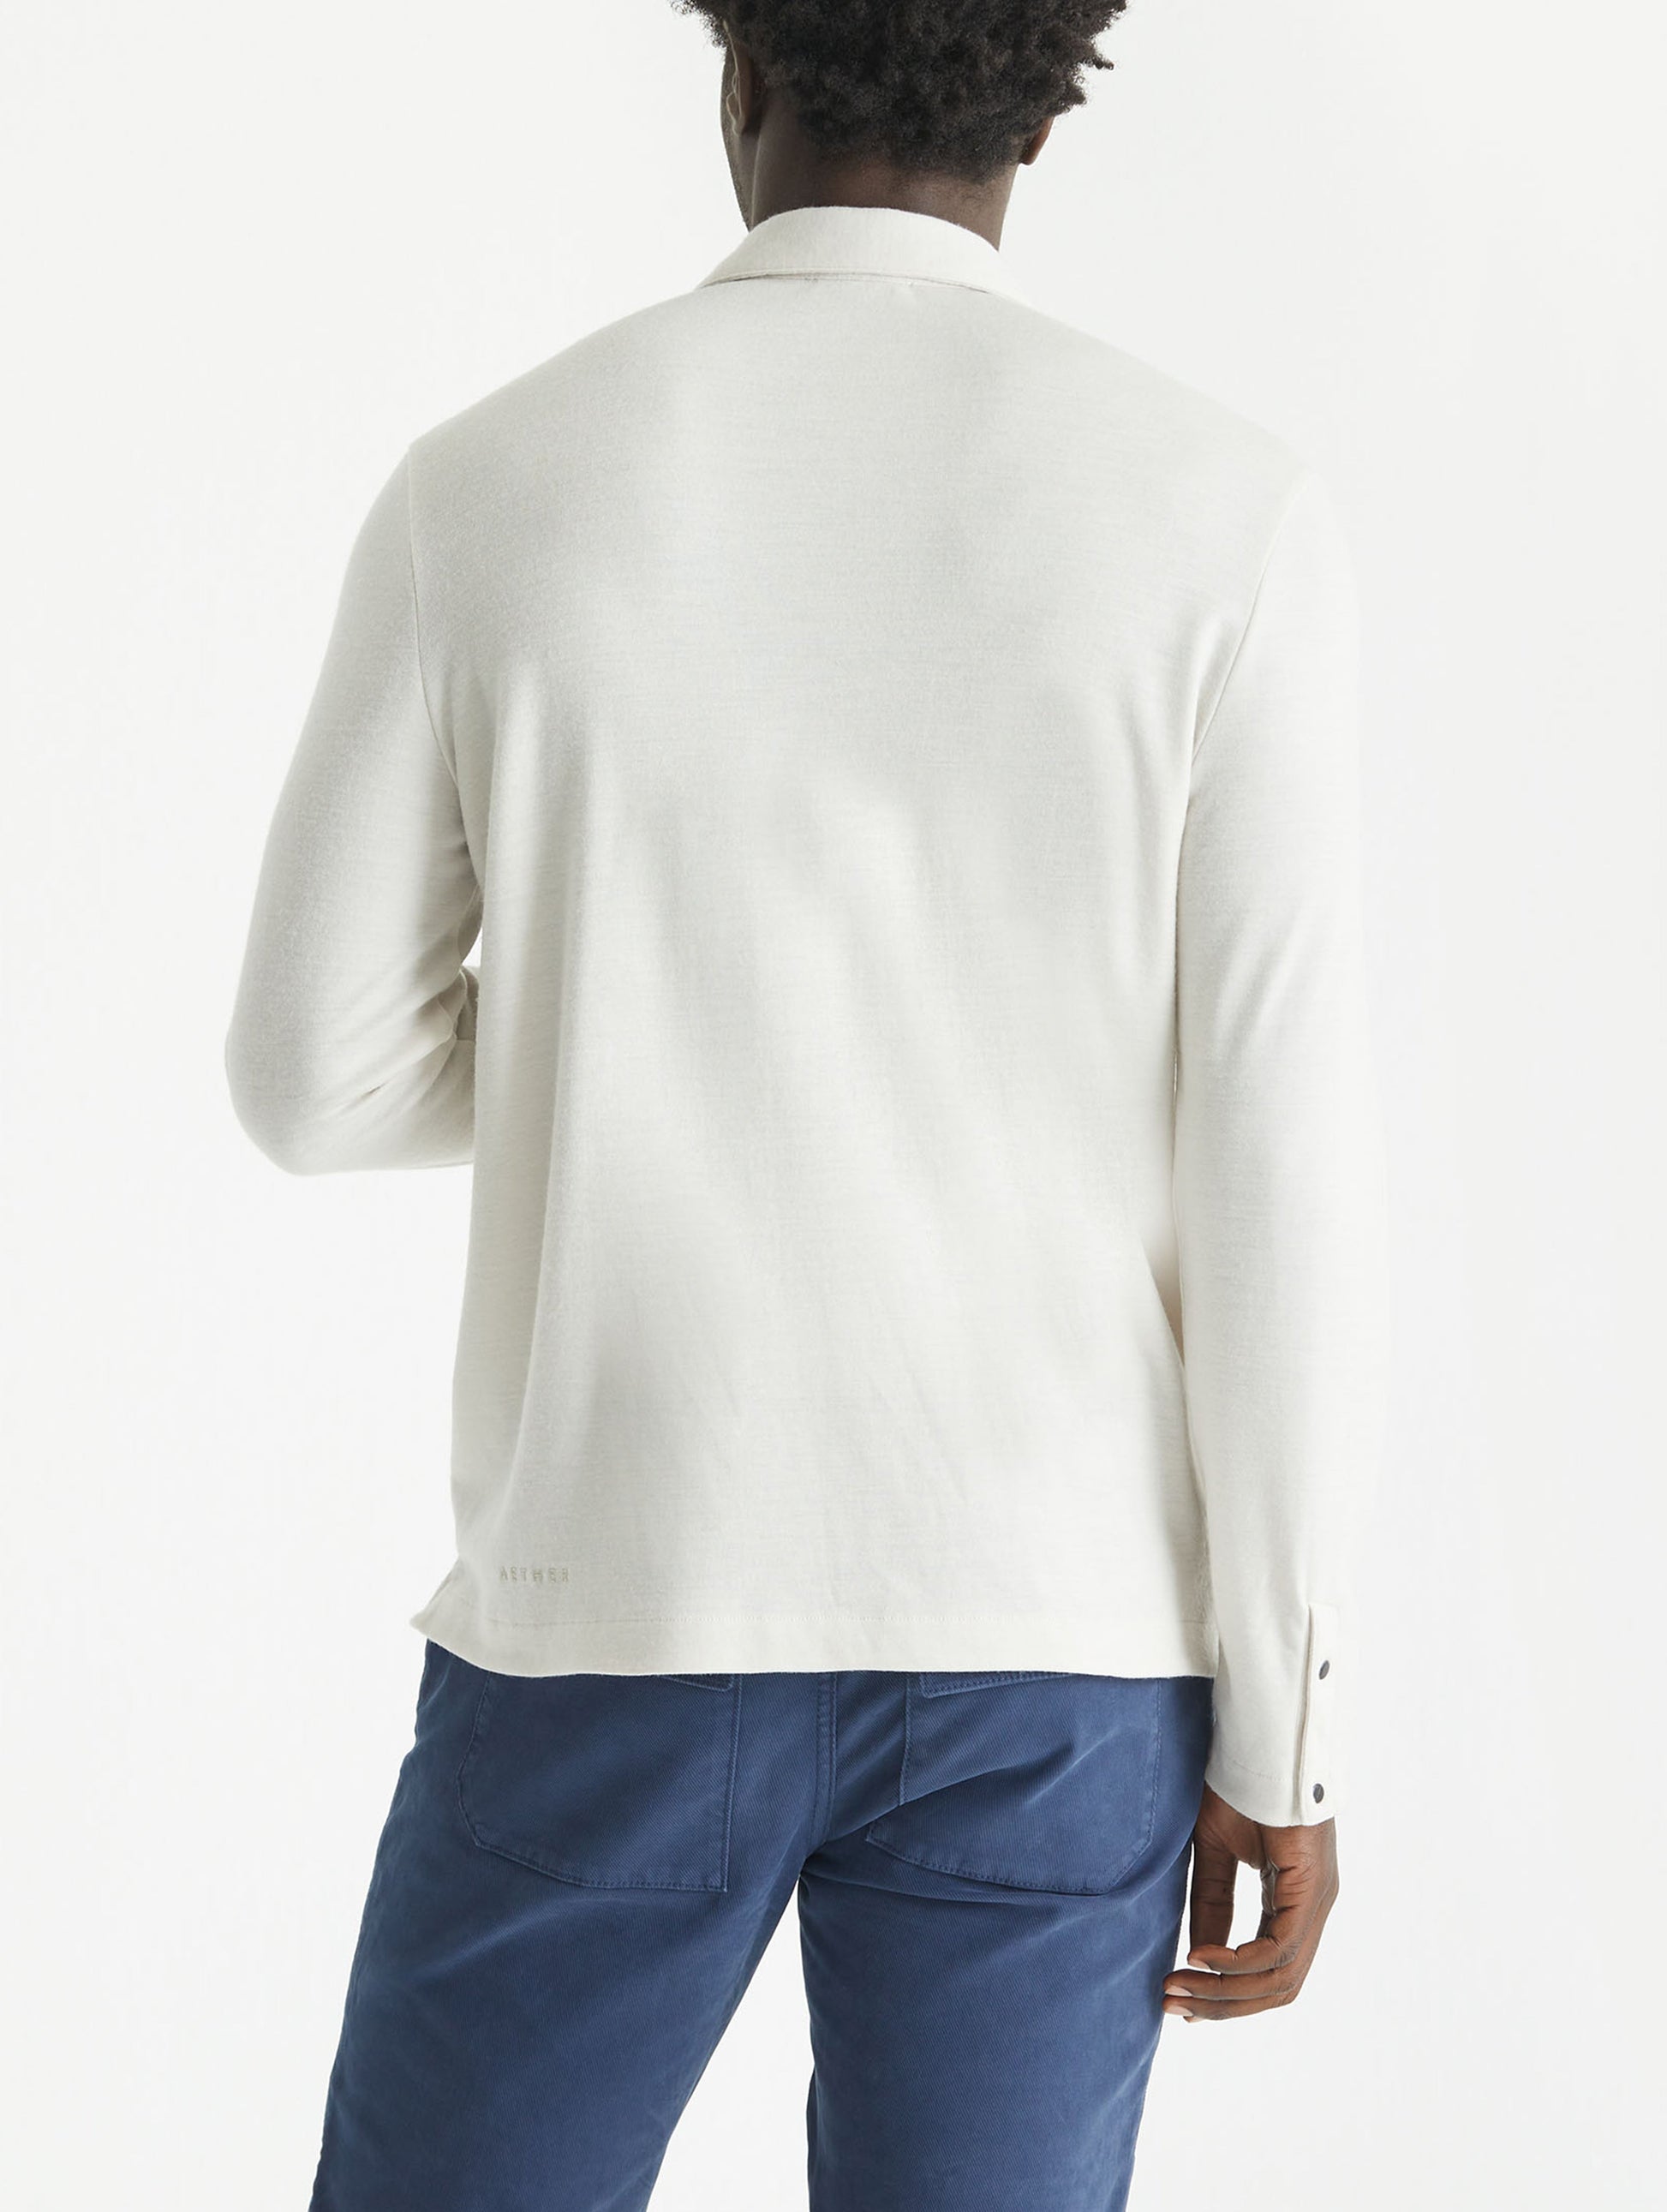 long-sleeve shirt from Aether Apparel